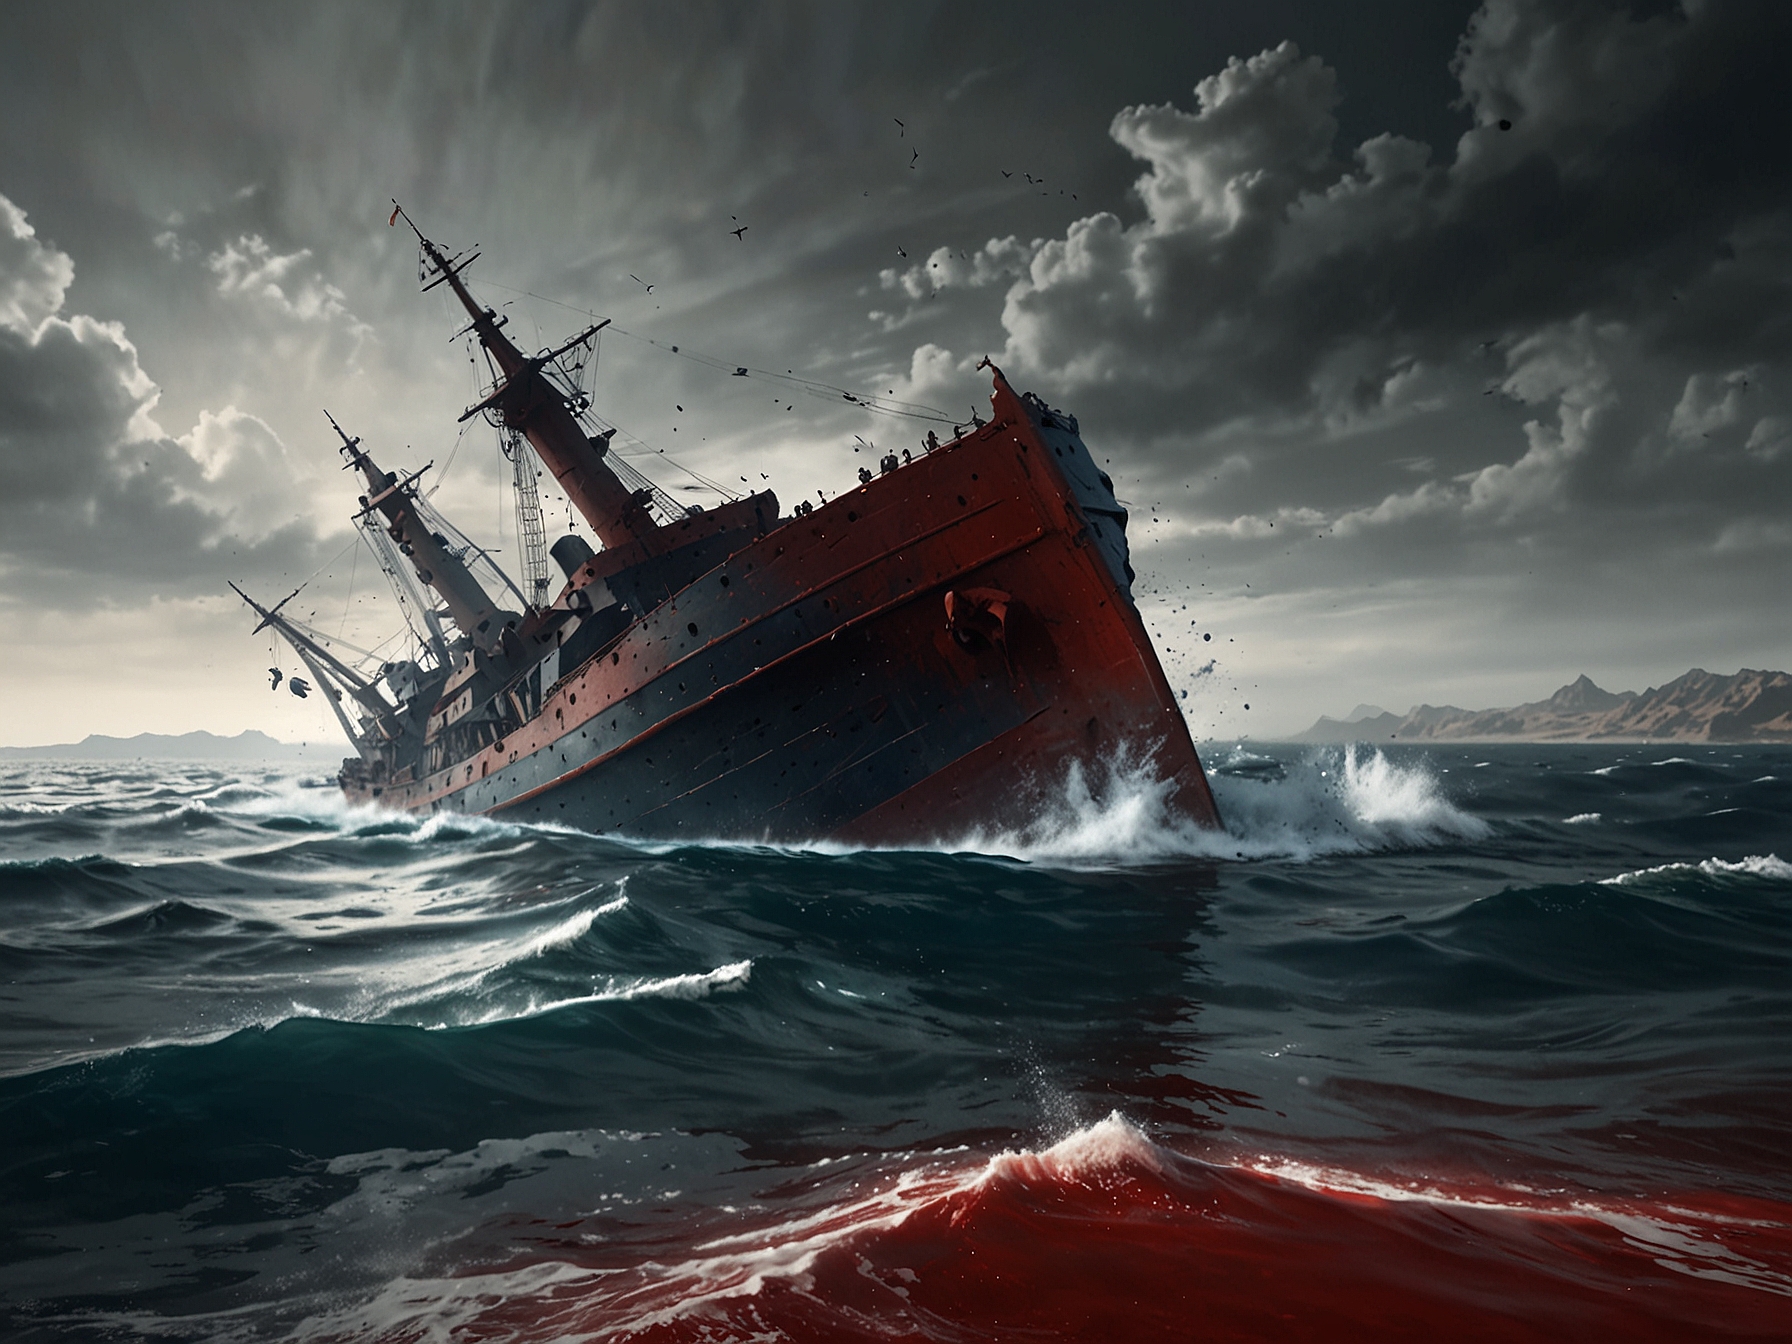 A dramatic image of a sinking ship in the Red Sea, illustrating the heightened risks and disruptive impacts on critical maritime routes due to Houthi rebel activities.